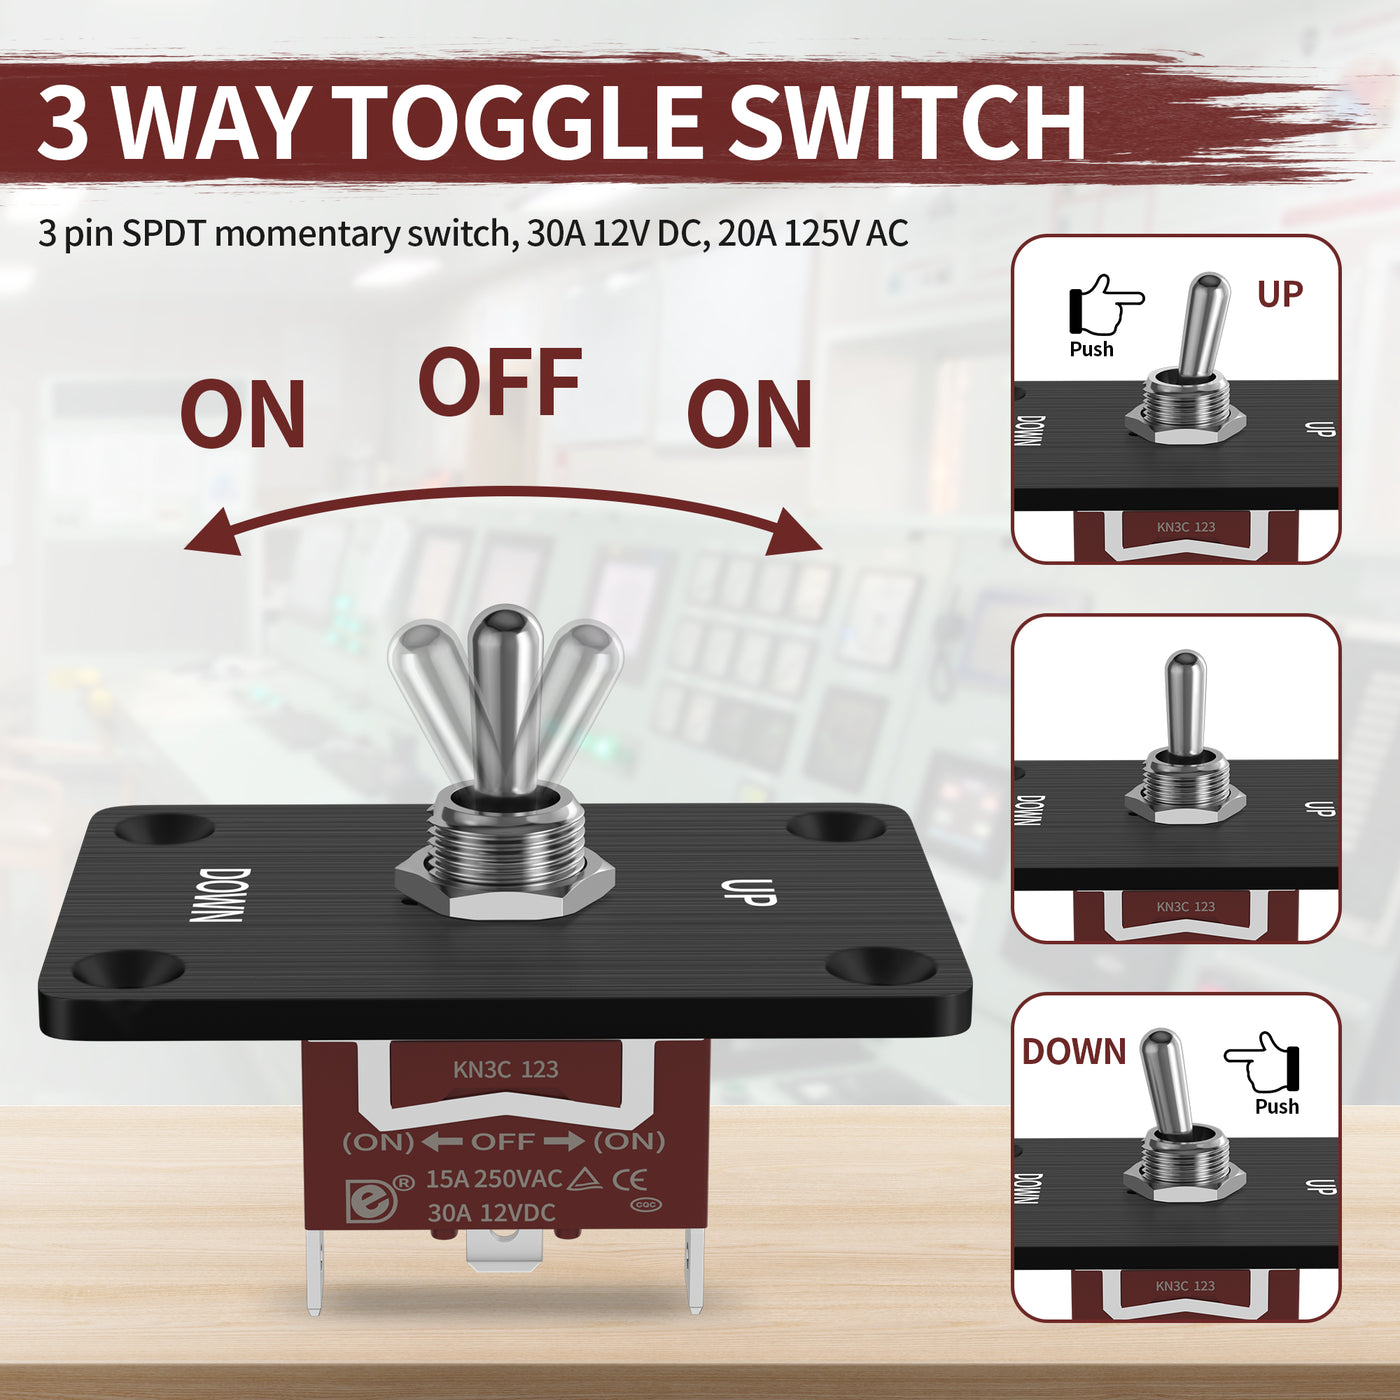 30A 12VDC SPDT 3 Way Momentary Toggle Switch with Plate and Cover - DAIER